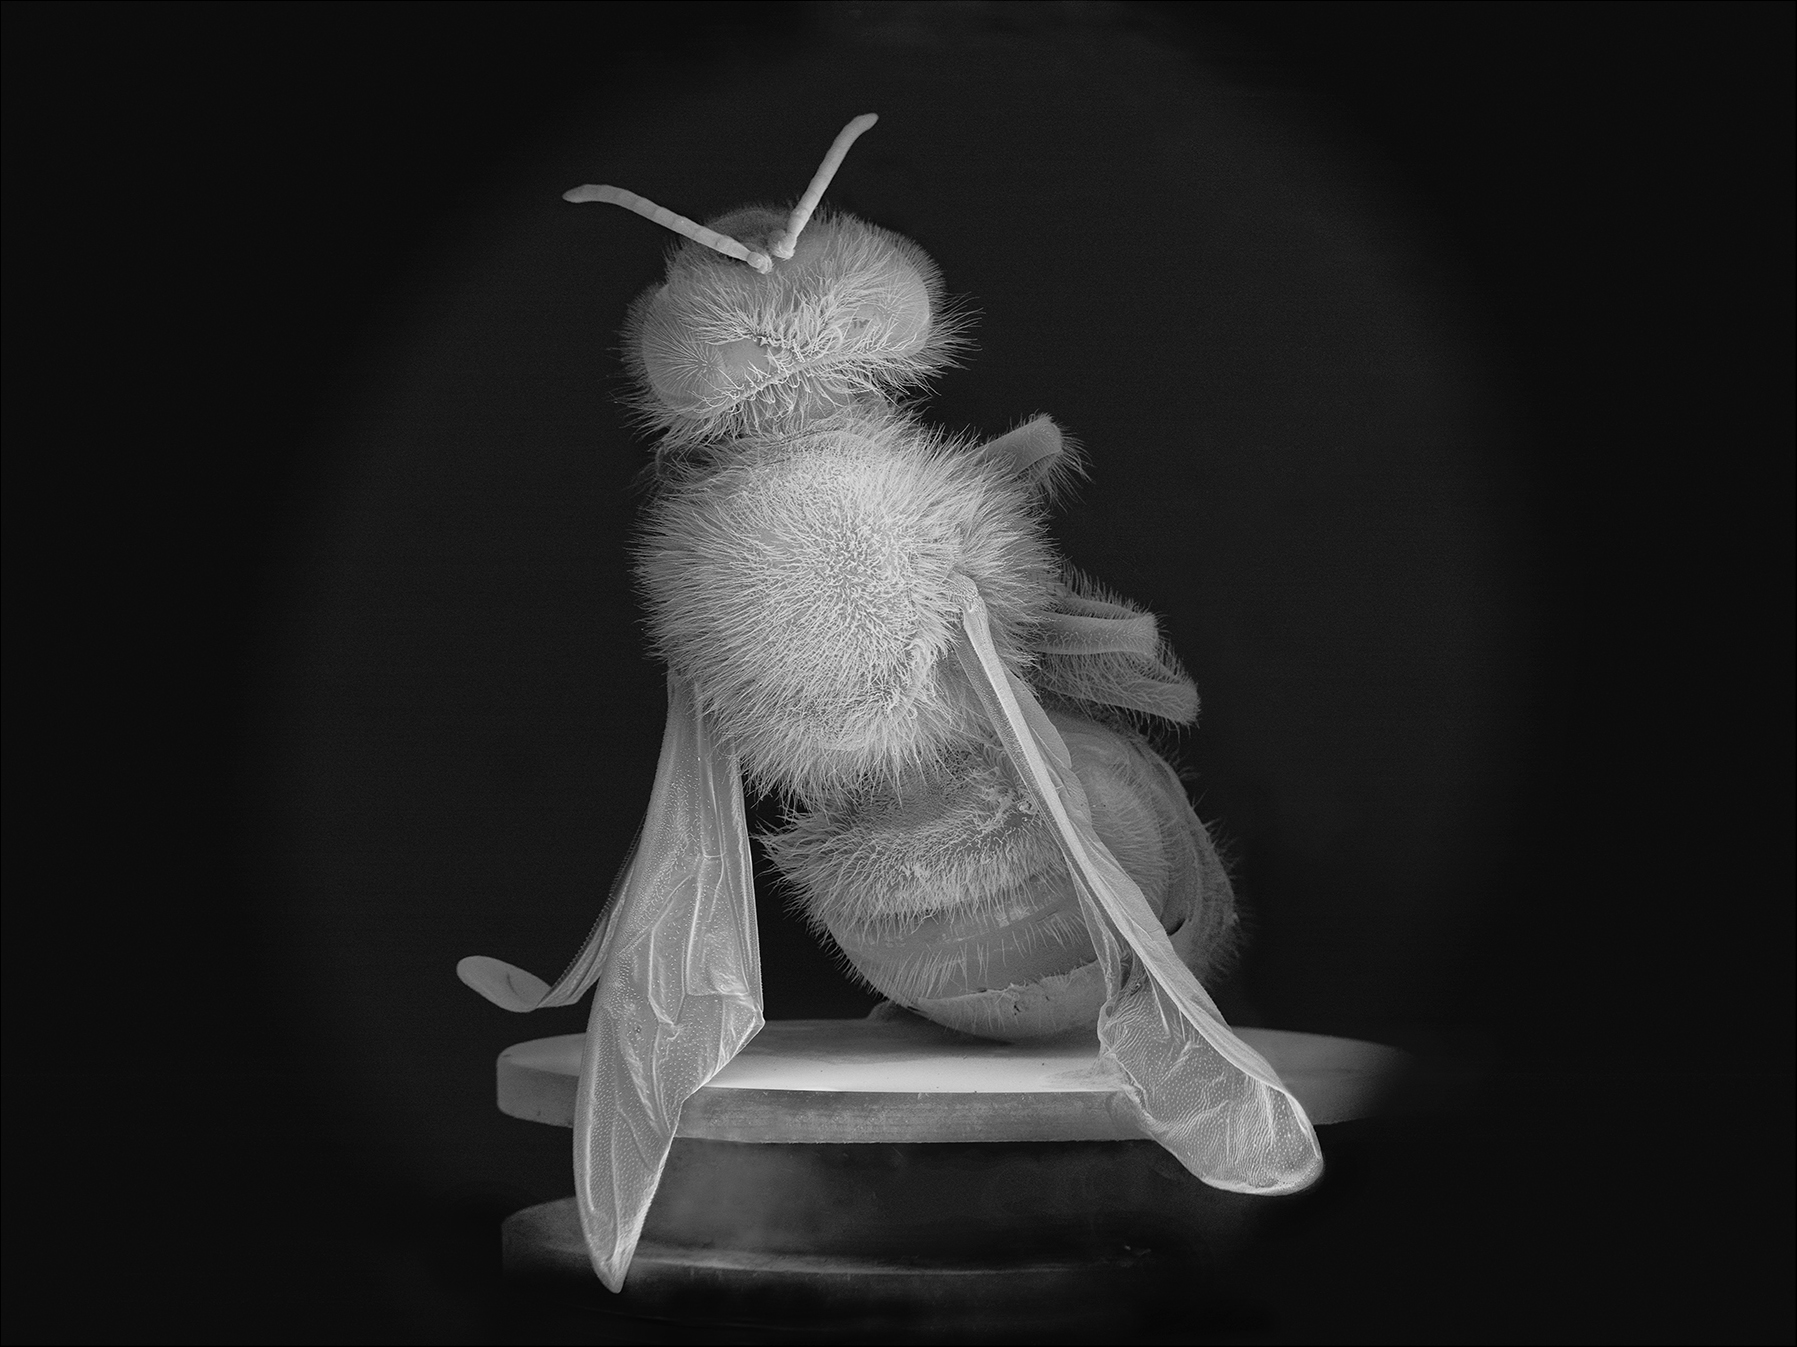 Making of a Poem: Eliot Weinberger on “The Ceaseless Murmuring of Innumerable Bees”